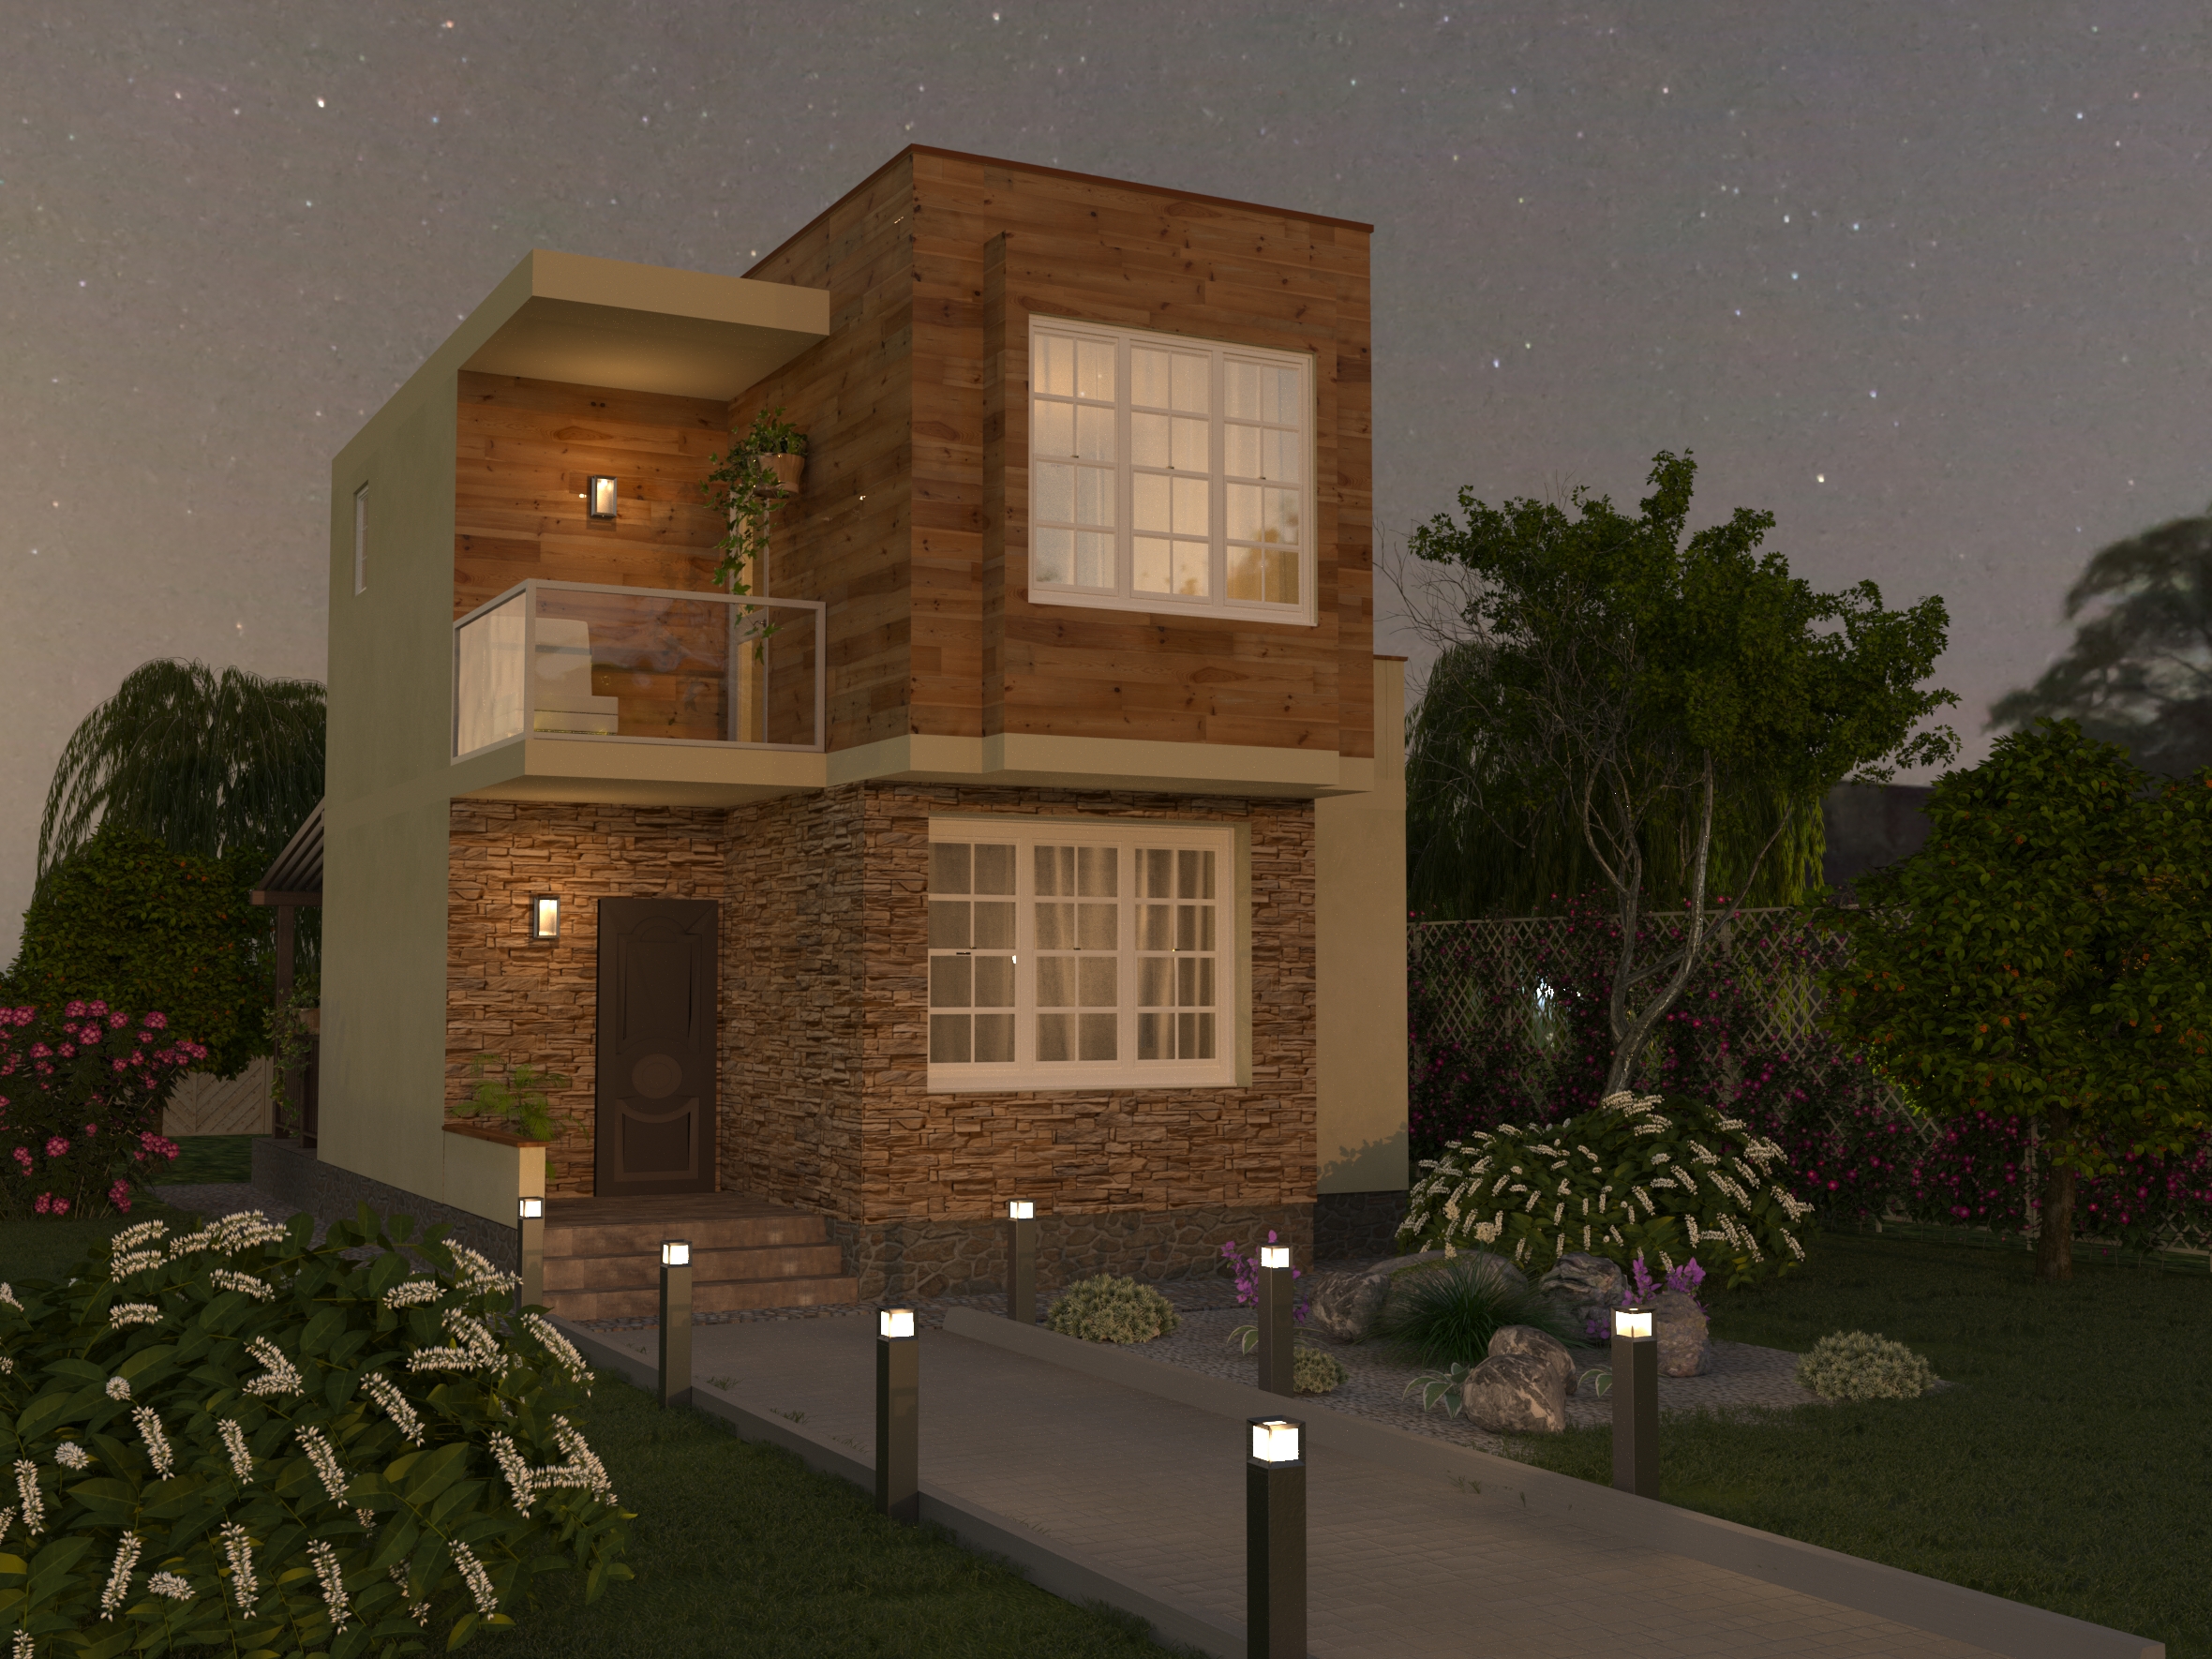 Two-storey house 6,5x7,5m in 3d max corona render image